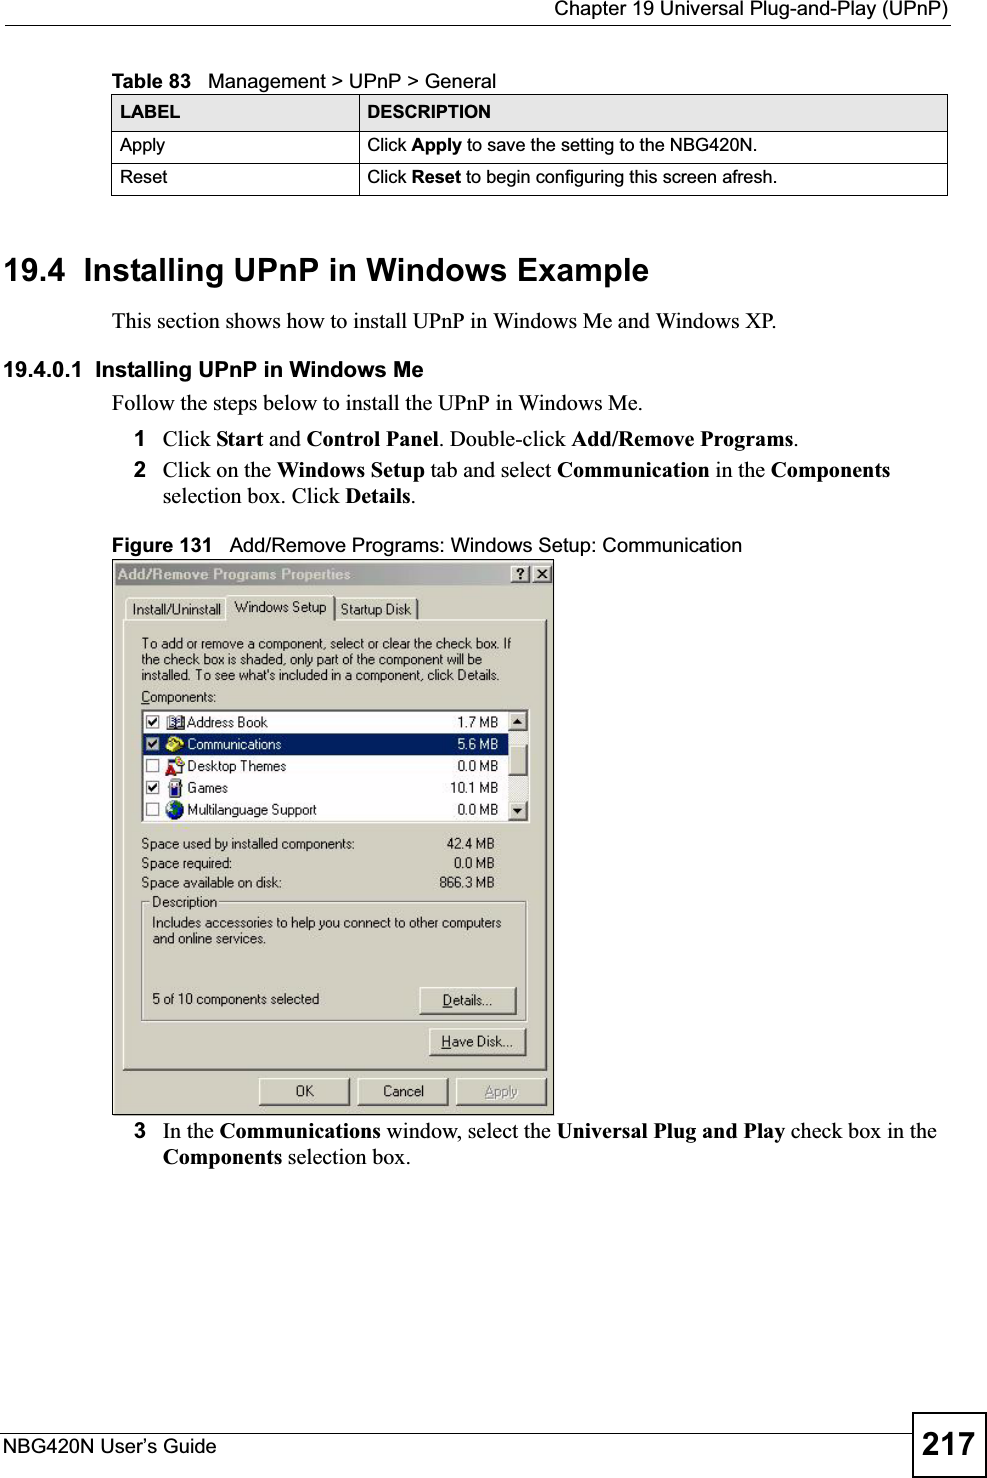  Chapter 19 Universal Plug-and-Play (UPnP)NBG420N User’s Guide 21719.4  Installing UPnP in Windows ExampleThis section shows how to install UPnP in Windows Me and Windows XP. 19.4.0.1  Installing UPnP in Windows MeFollow the steps below to install the UPnP in Windows Me. 1Click Start and Control Panel. Double-click Add/Remove Programs.2Click on the Windows Setup tab and select Communication in the Componentsselection box. Click Details.Figure 131   Add/Remove Programs: Windows Setup: Communication 3In the Communications window, select the Universal Plug and Play check box in the Components selection box. Apply Click Apply to save the setting to the NBG420N.Reset Click Reset to begin configuring this screen afresh.Table 83   Management &gt; UPnP &gt; GeneralLABEL DESCRIPTION